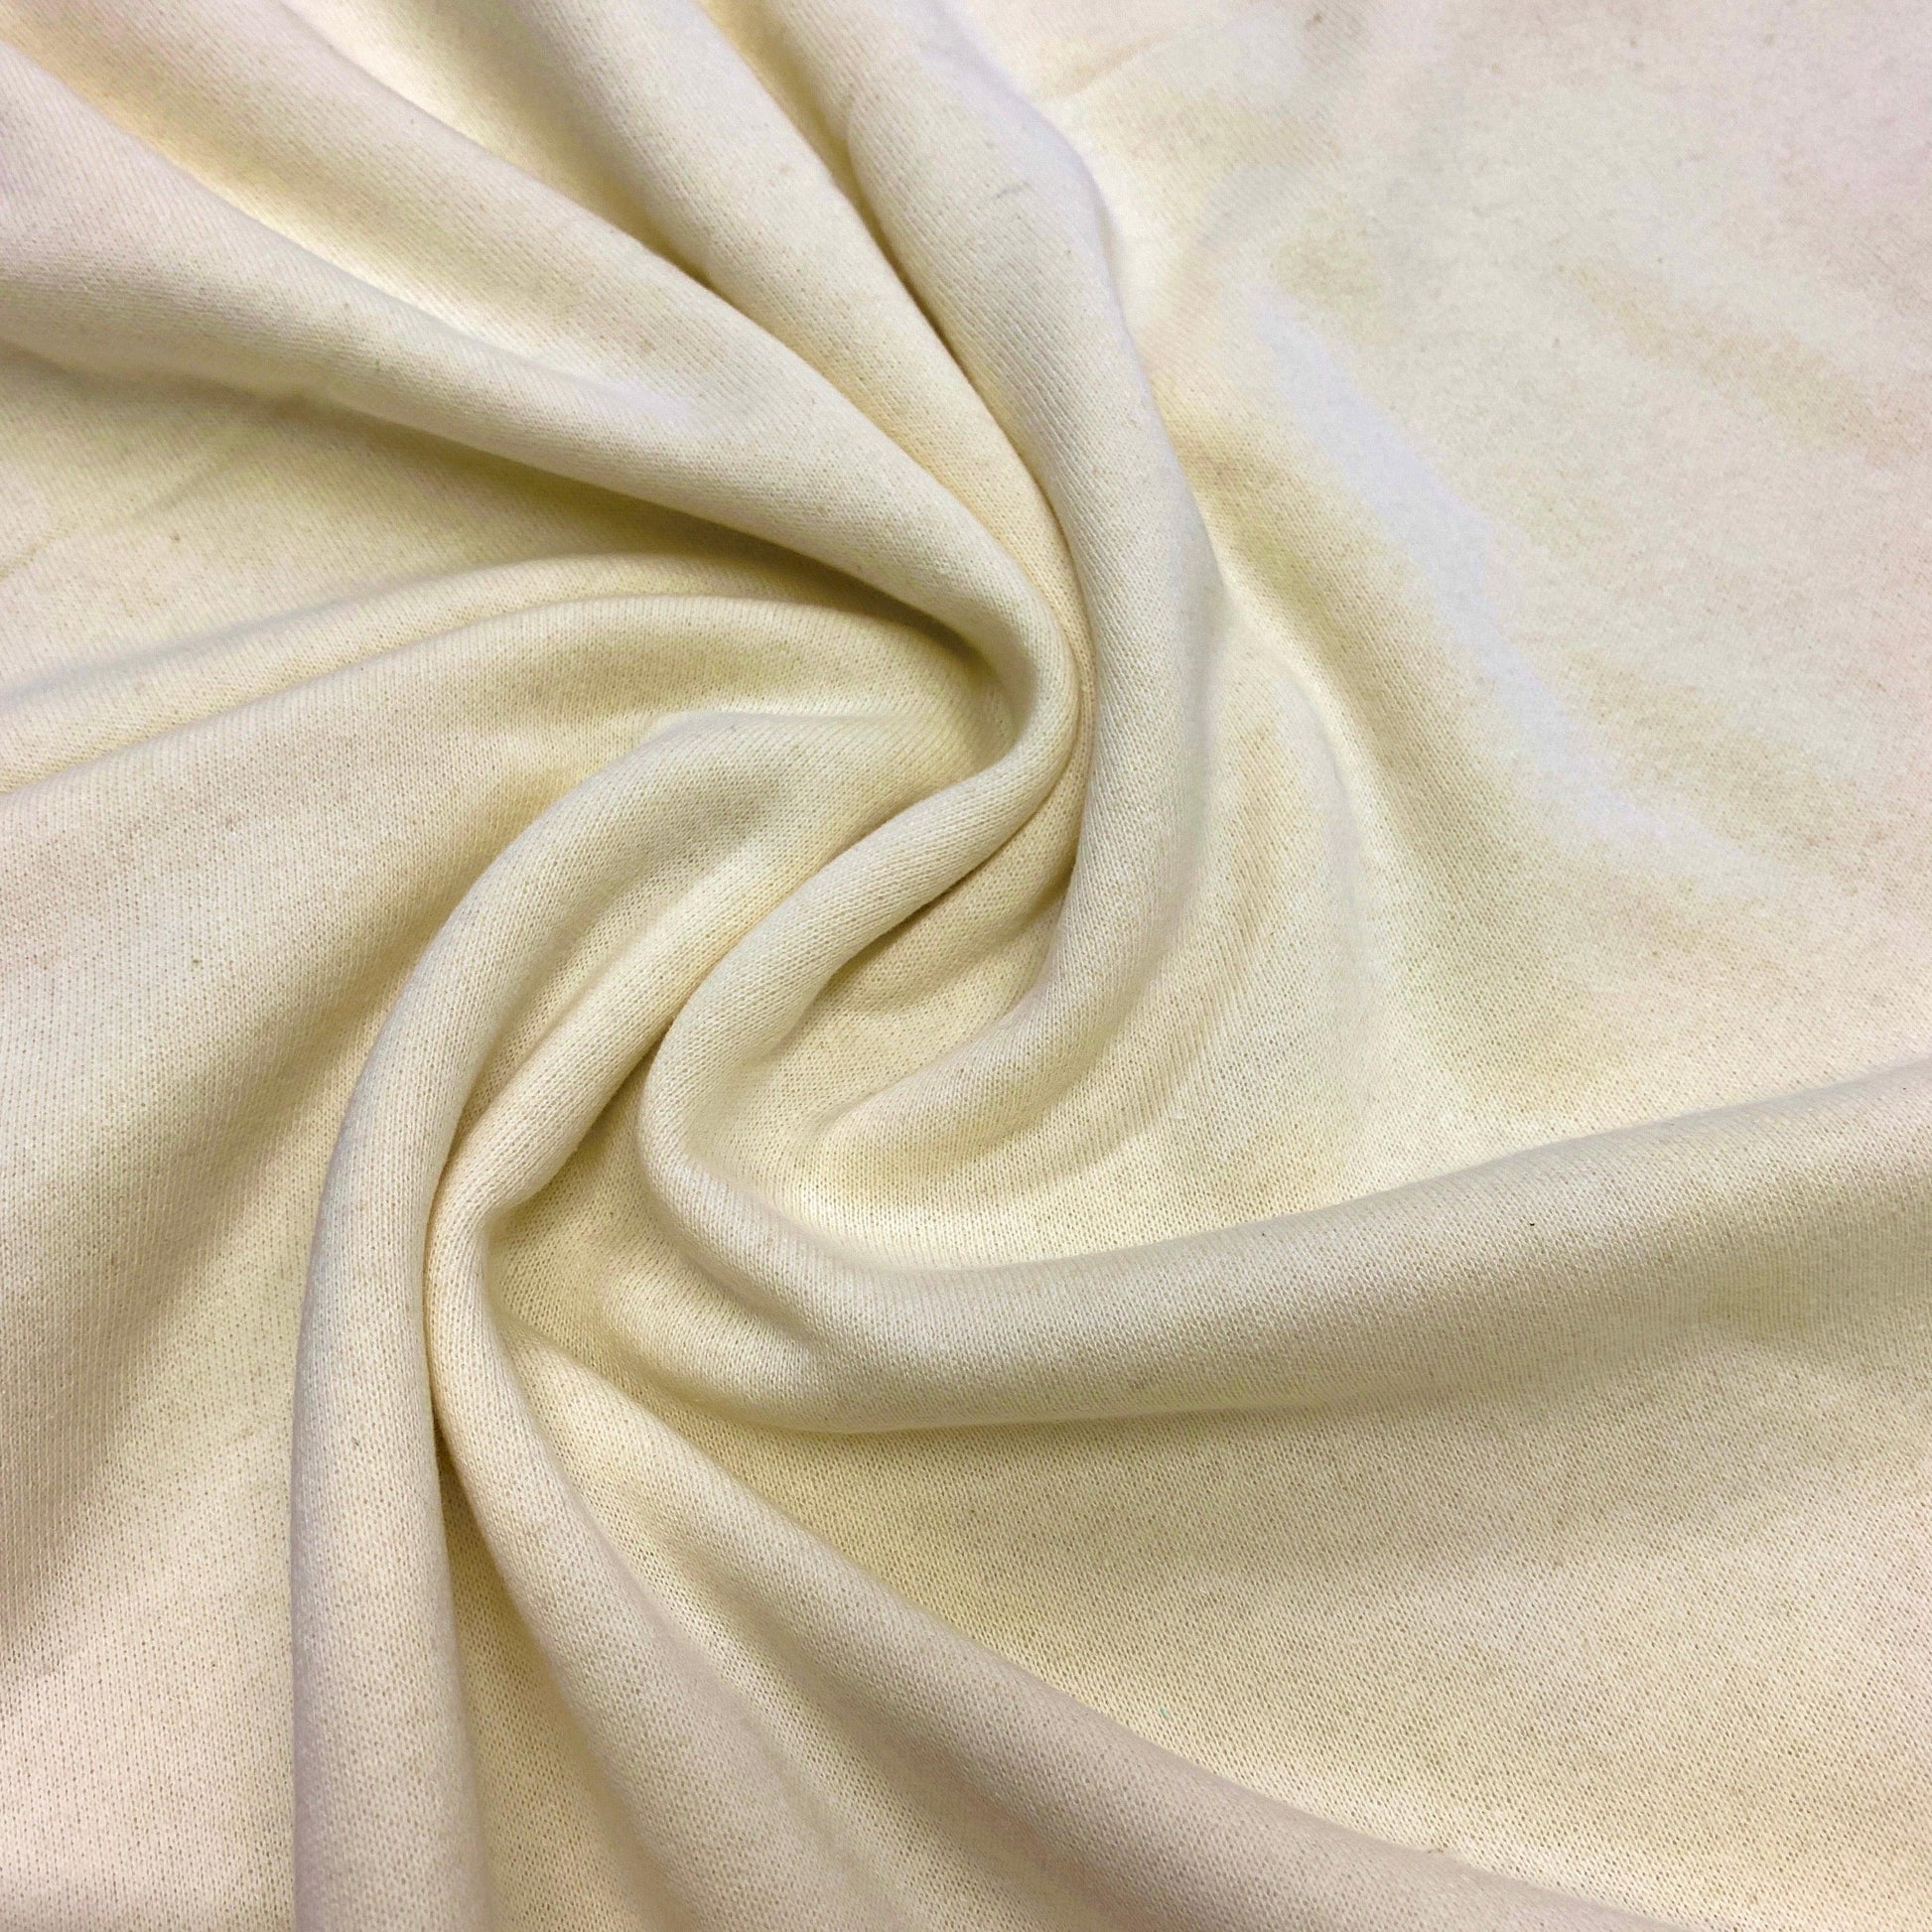 Wholesale Hemp Fabric Creme Terry Cloth Fabric by The Yard 500GSM Organic  Cotton Fabric French Terry Fabric - China Kintted Fabric and Cotton Fabric  price, Terry Cloth Fabric By The Yard 